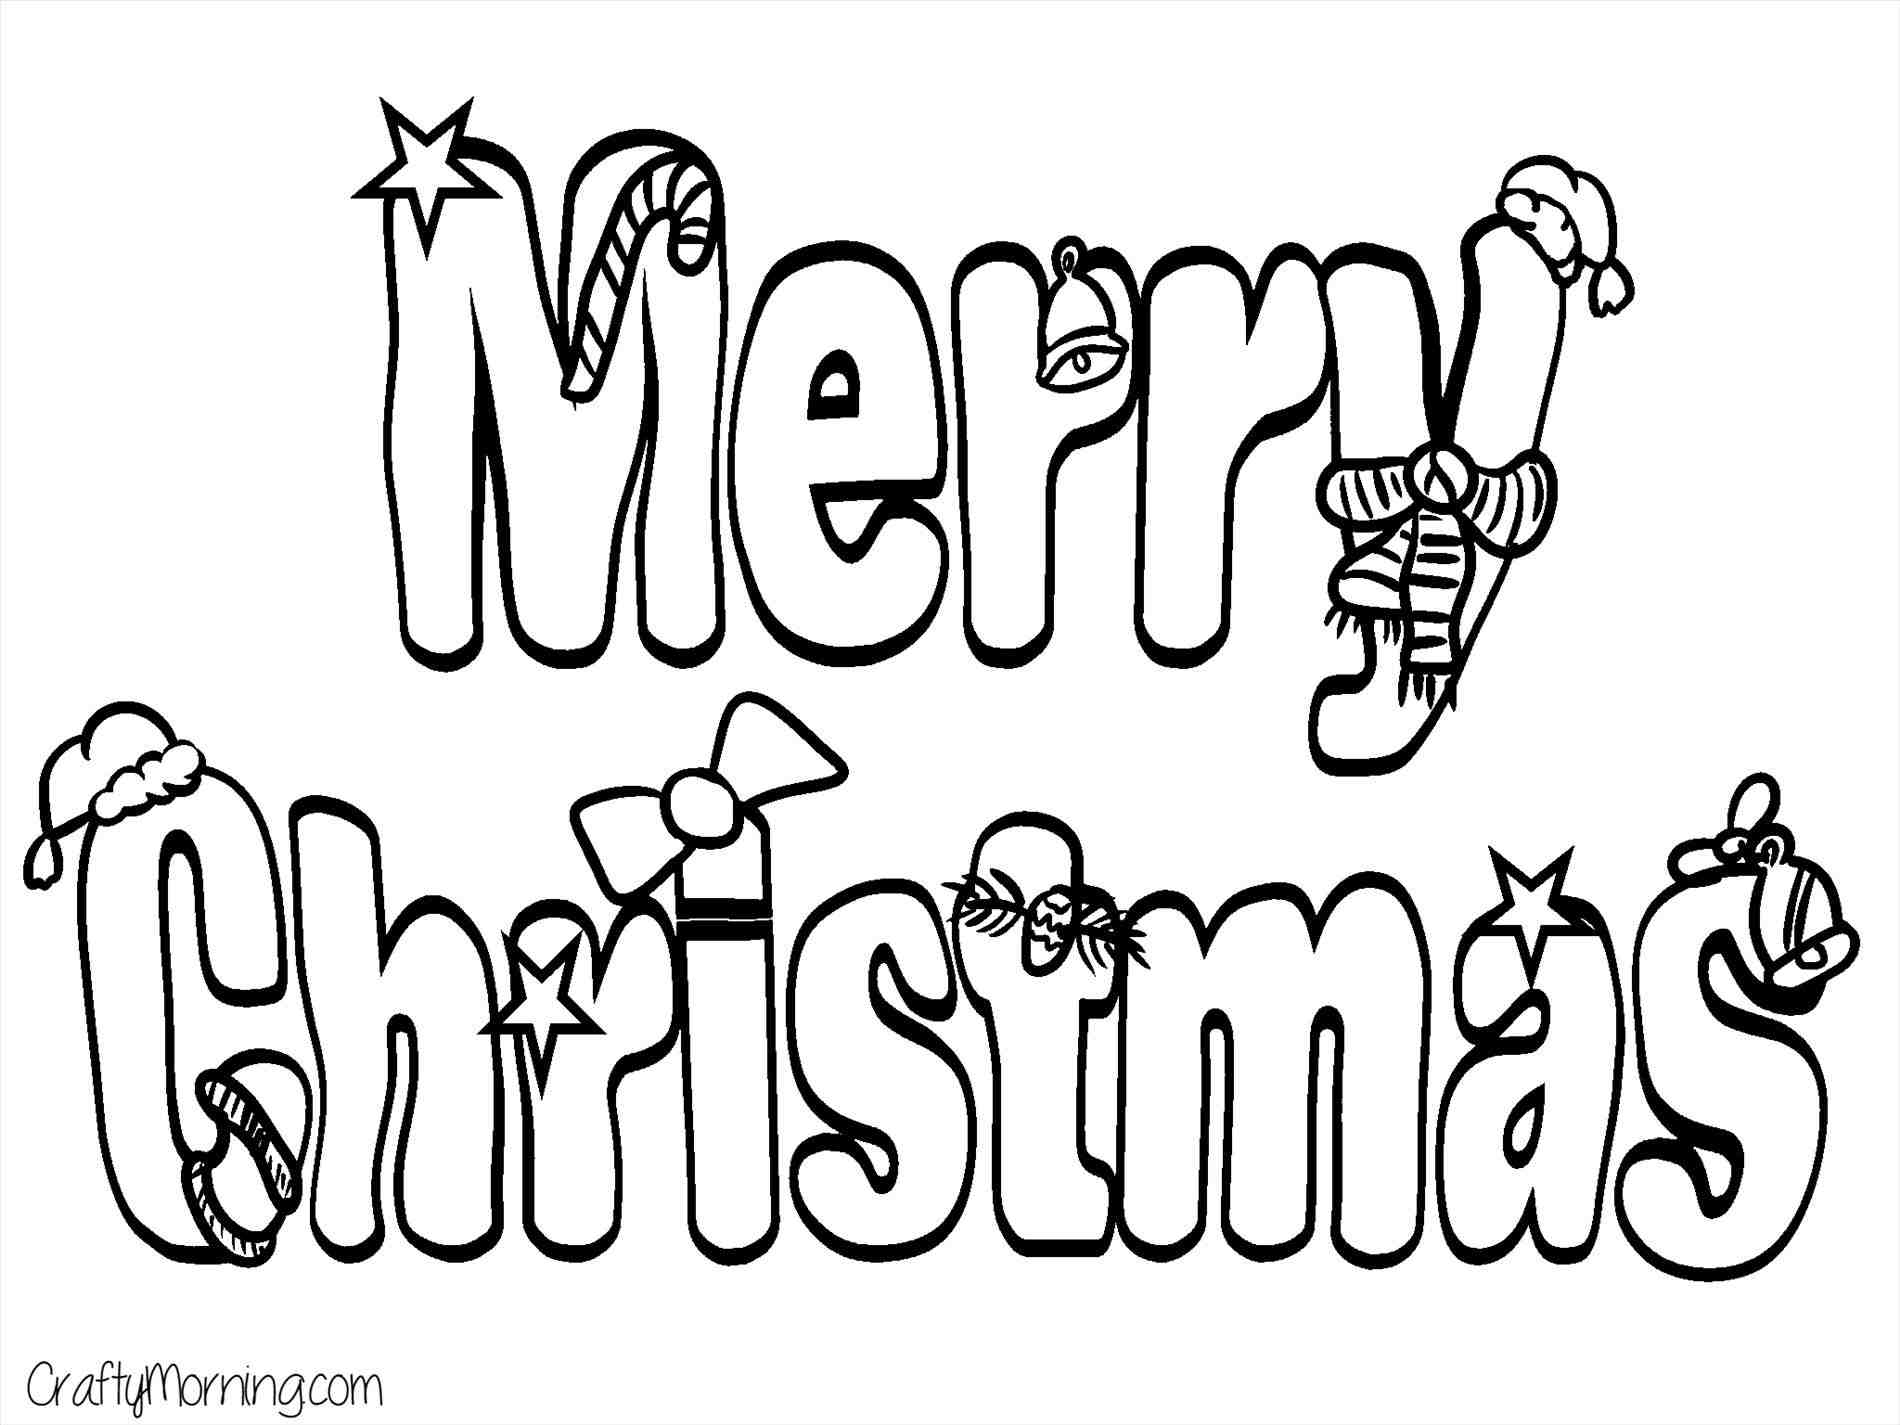 merry-christmas-coloring-pages-that-say-merry-christmas-at